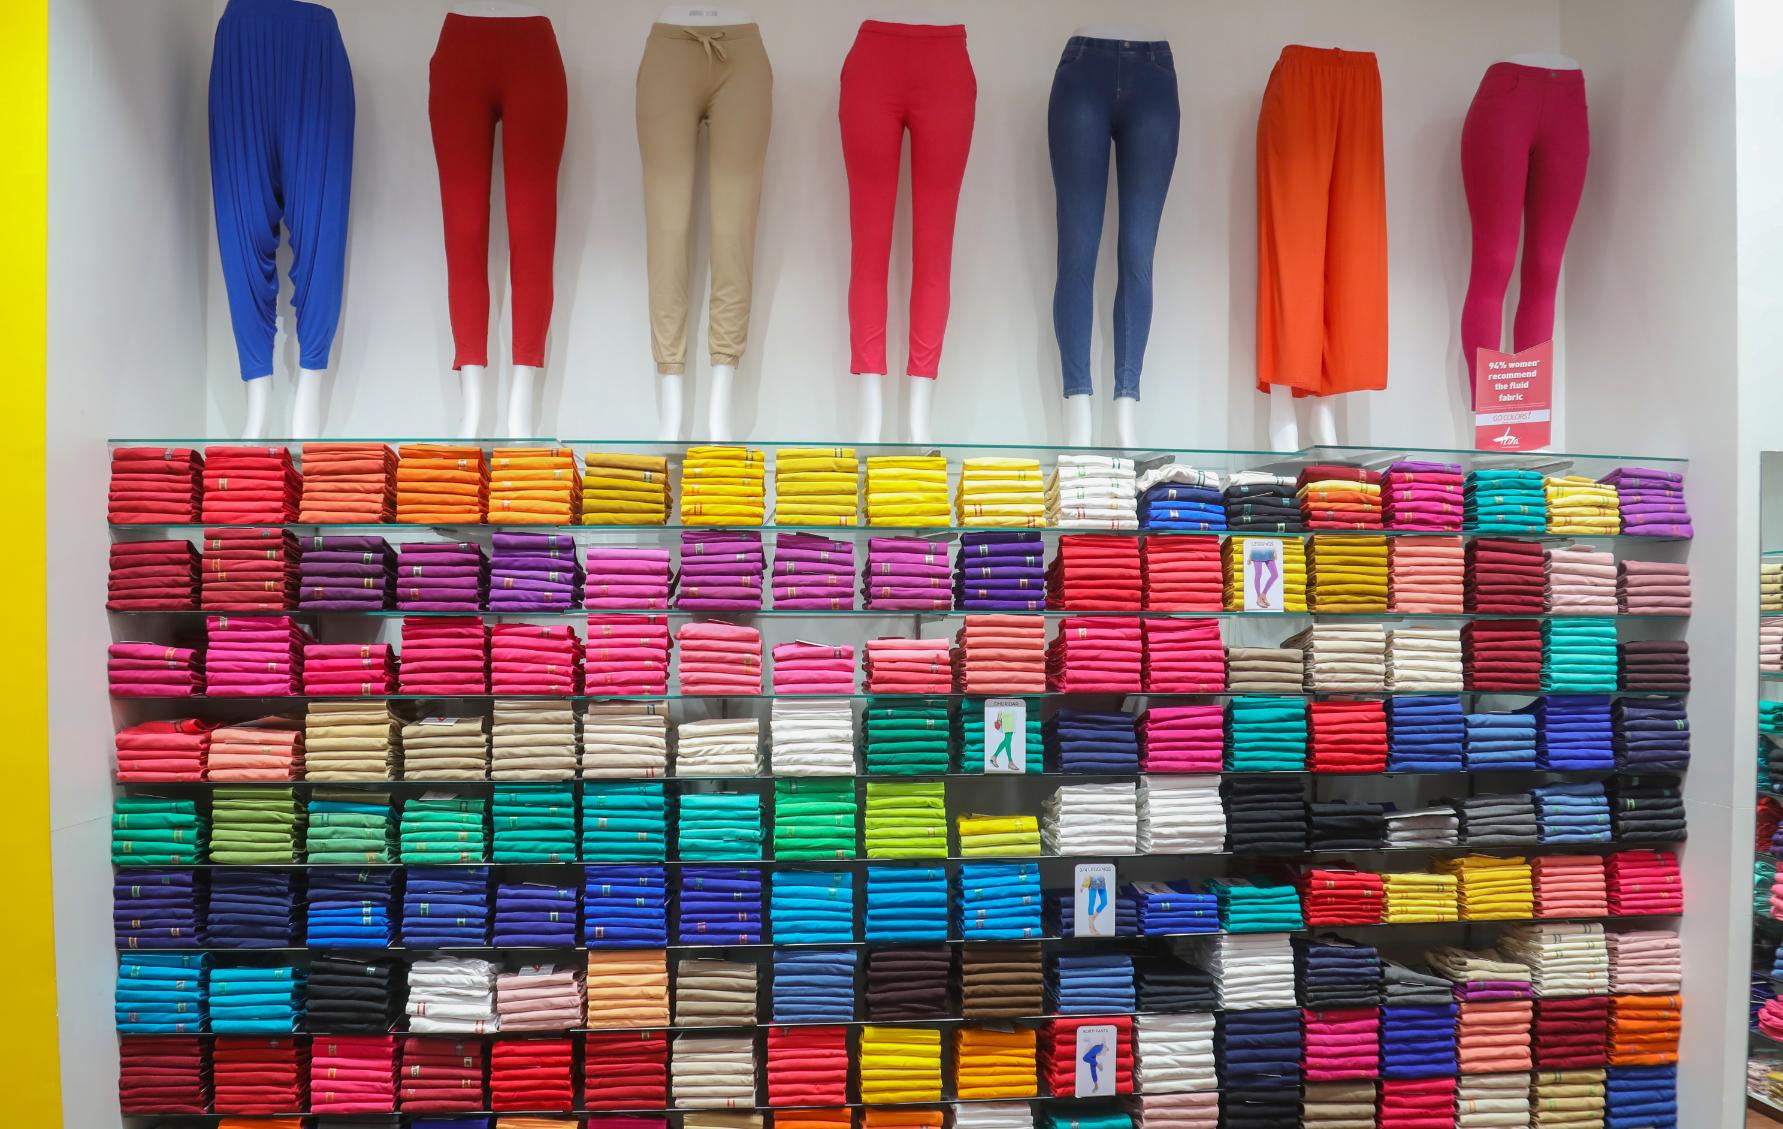 Display more than 135 go colors leggings latest